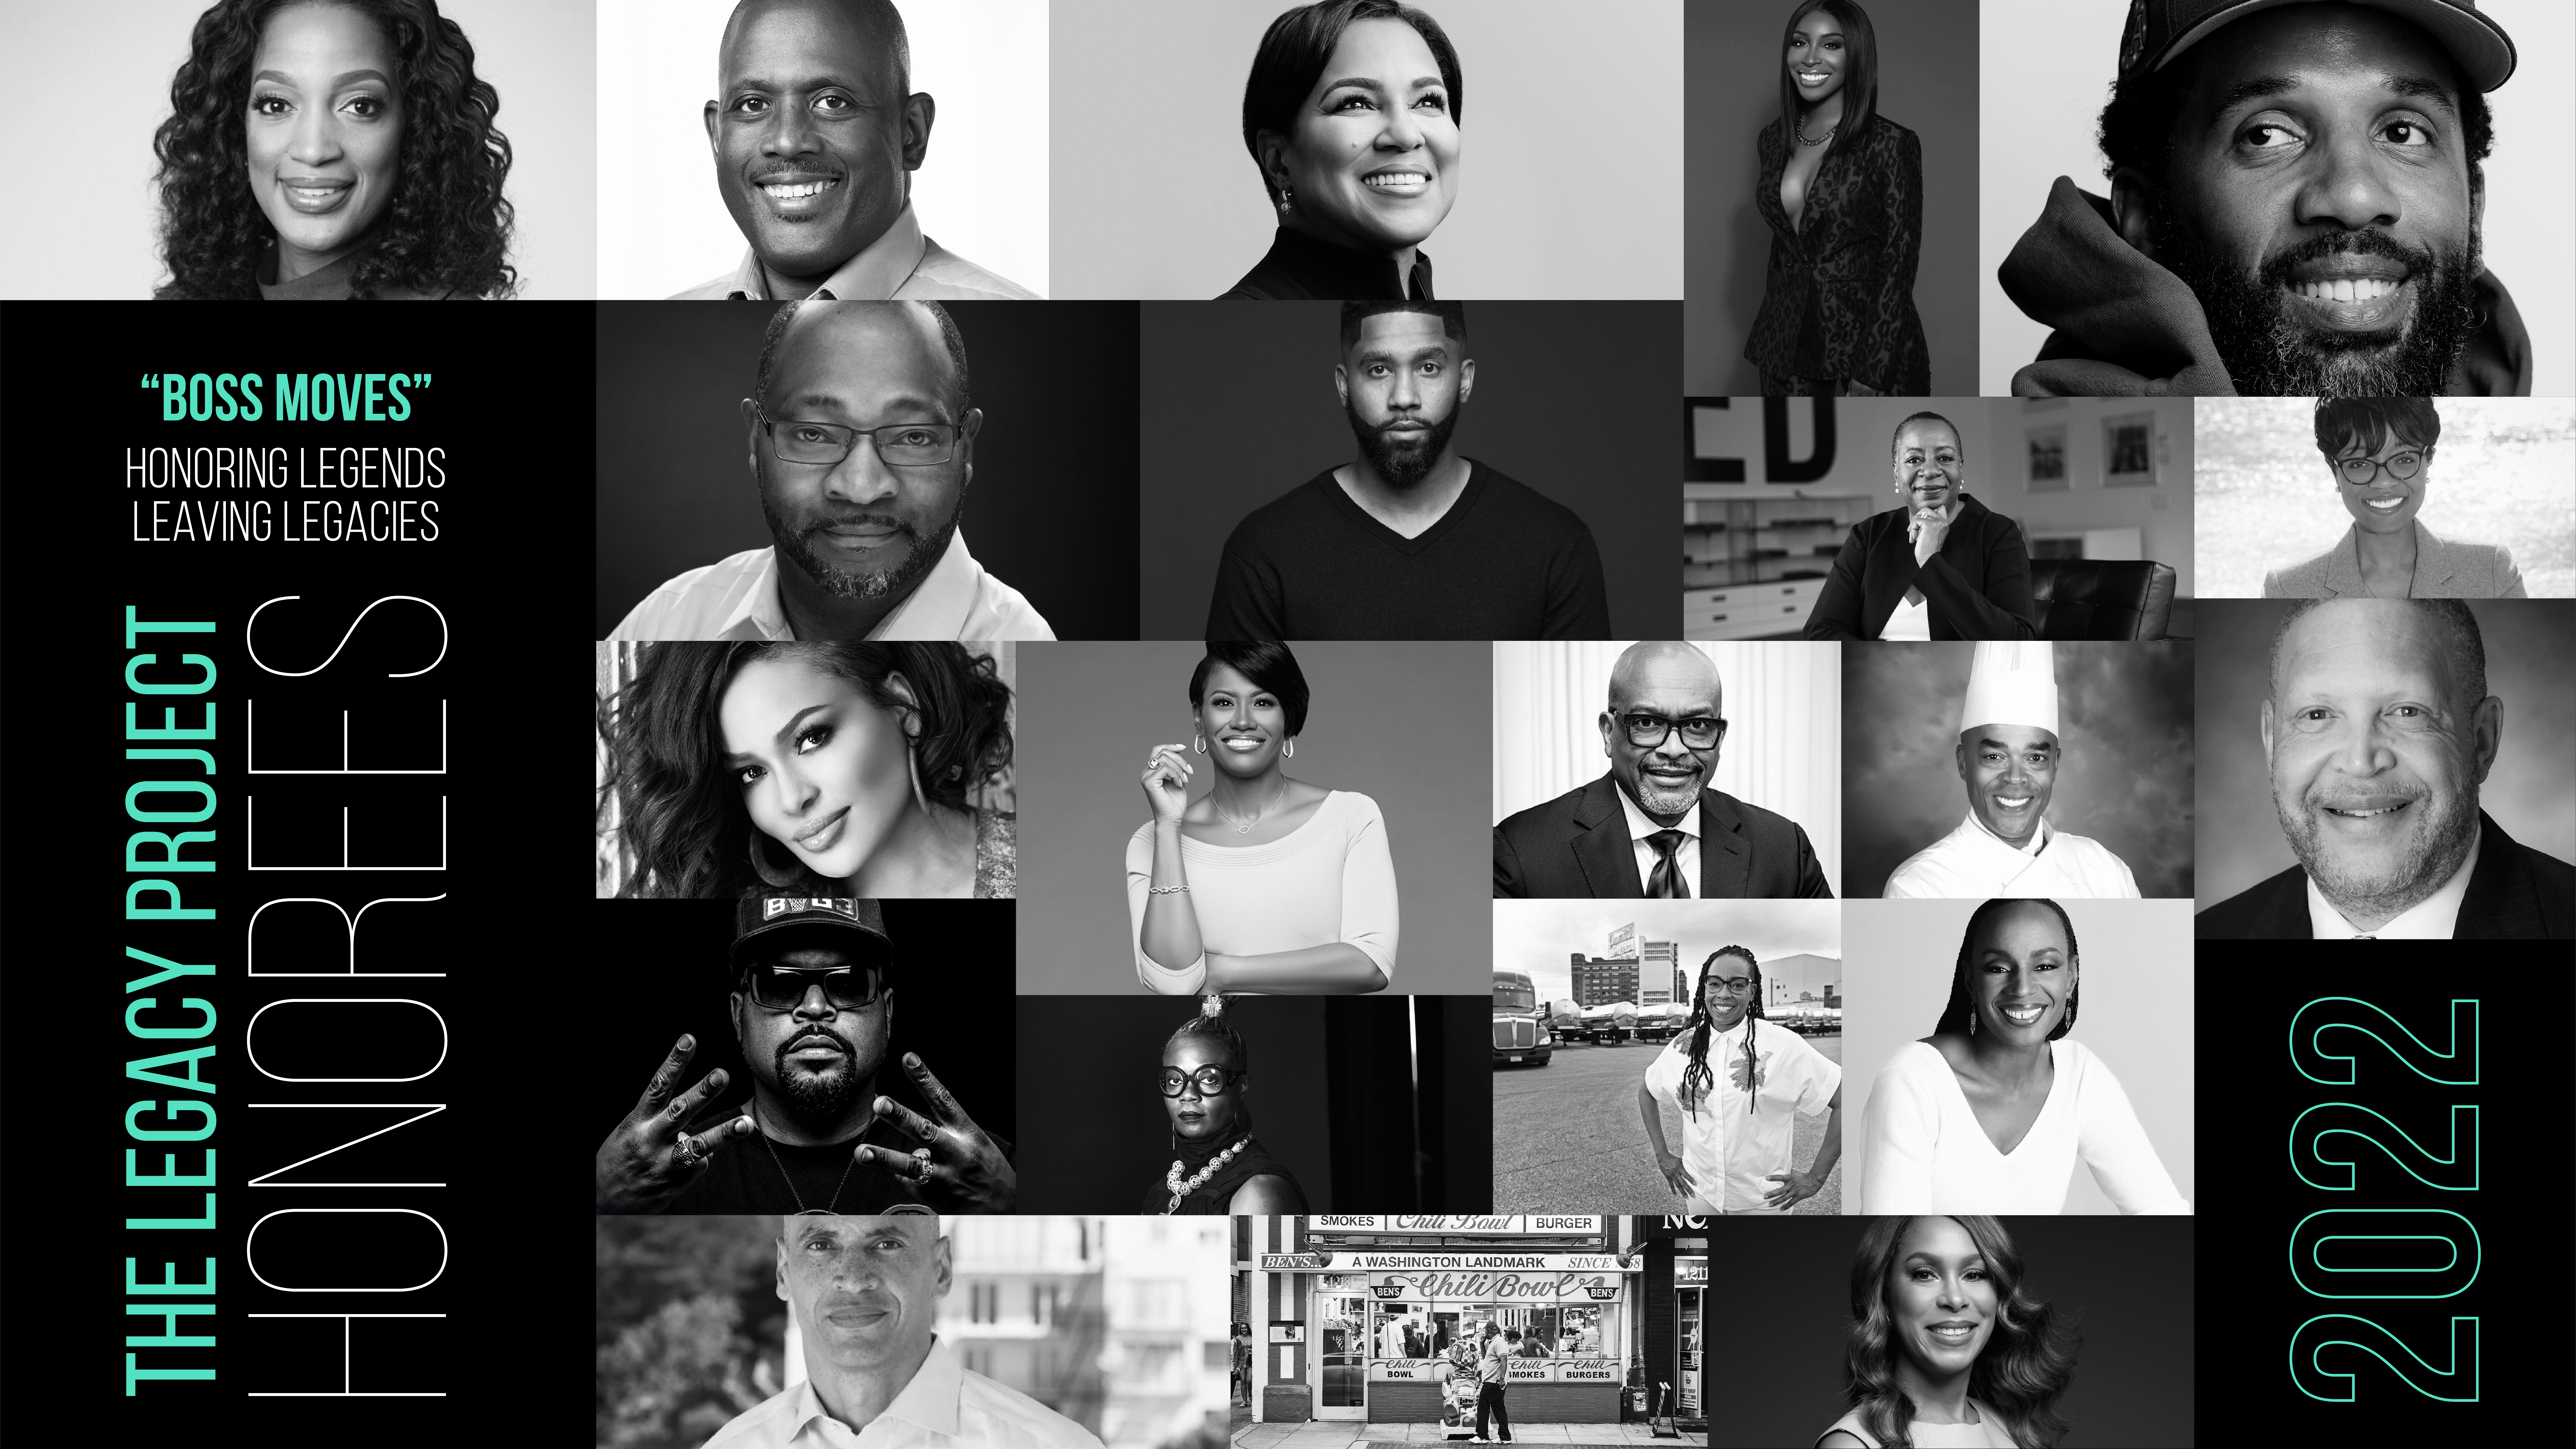 Black History In The Making: Black Professionals Making Boss Moves And Building Legacies